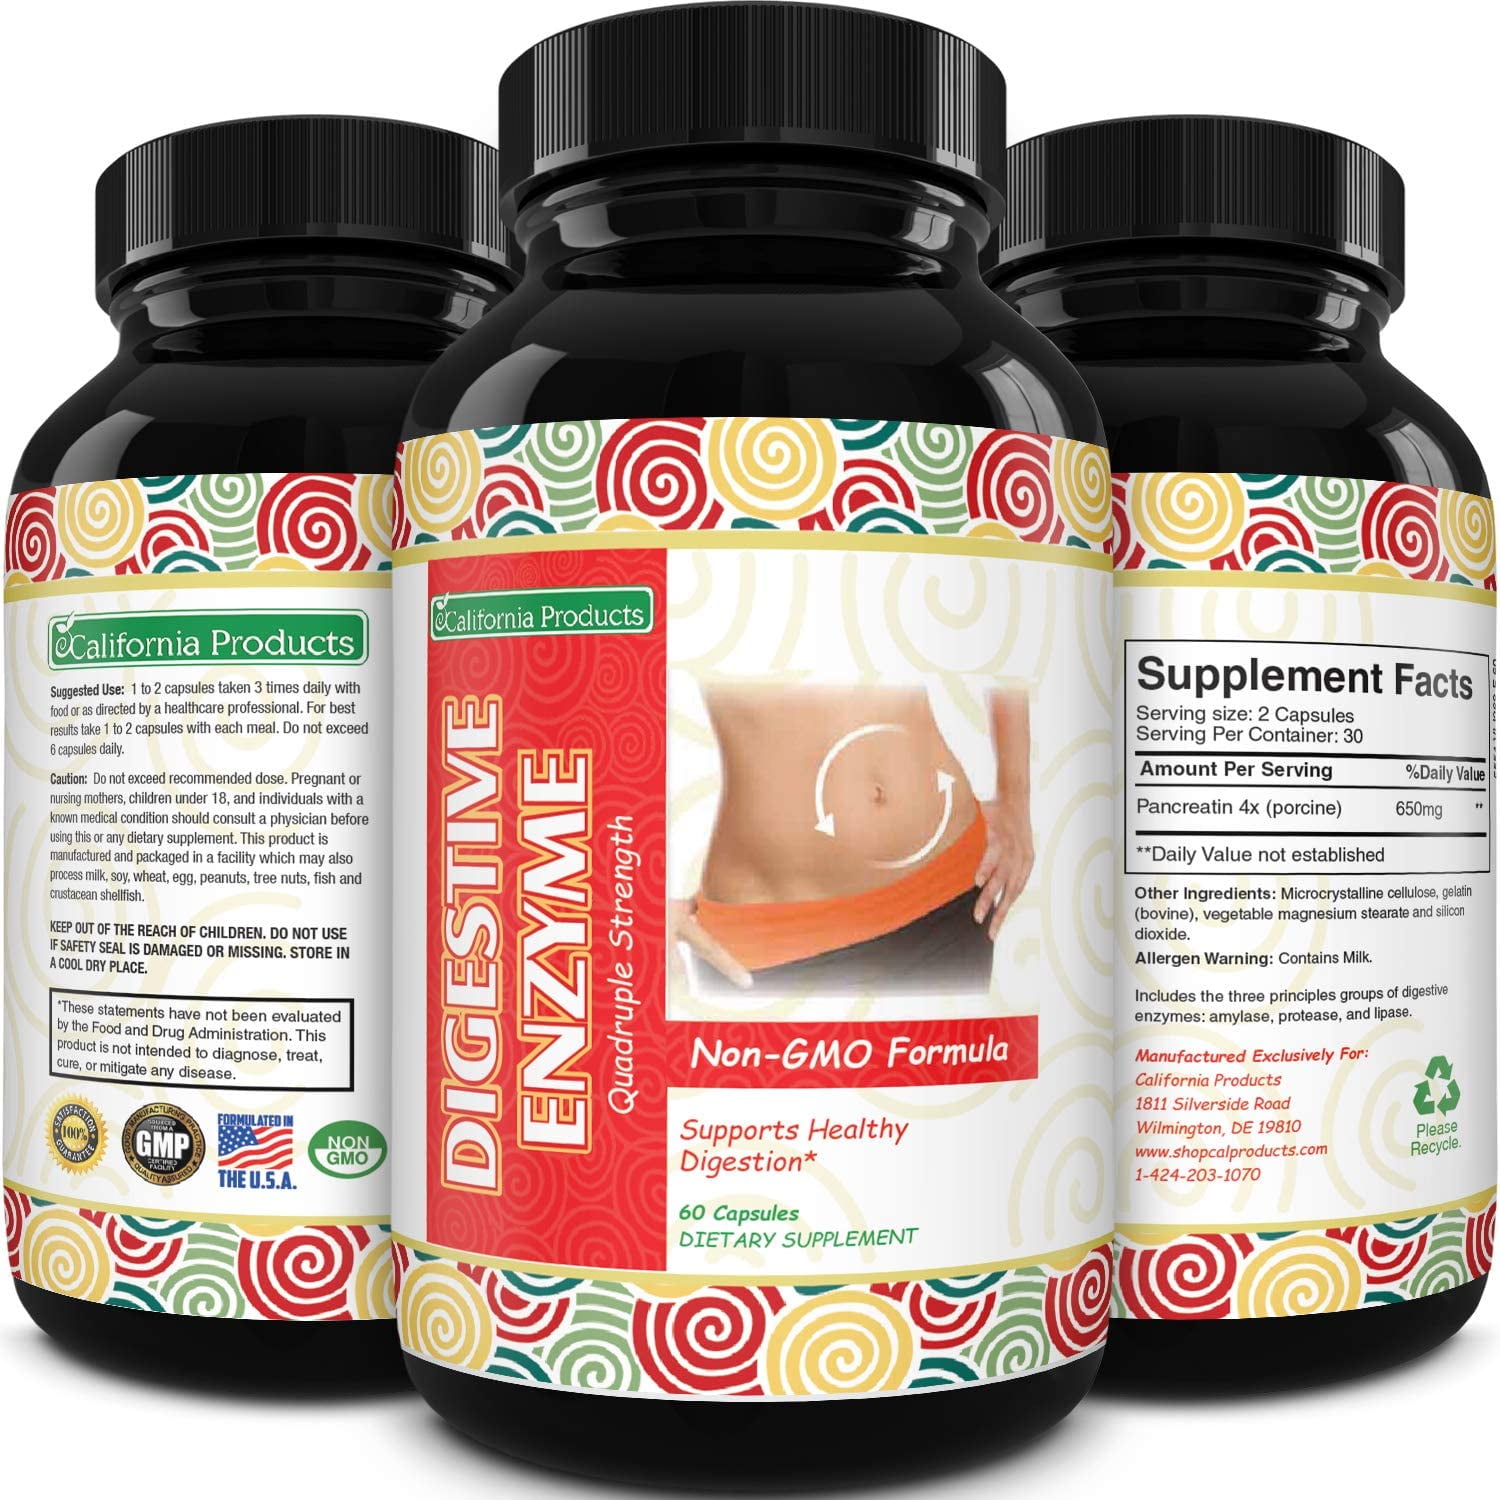 California Products Digestive Enzymes Pancreatin 4X